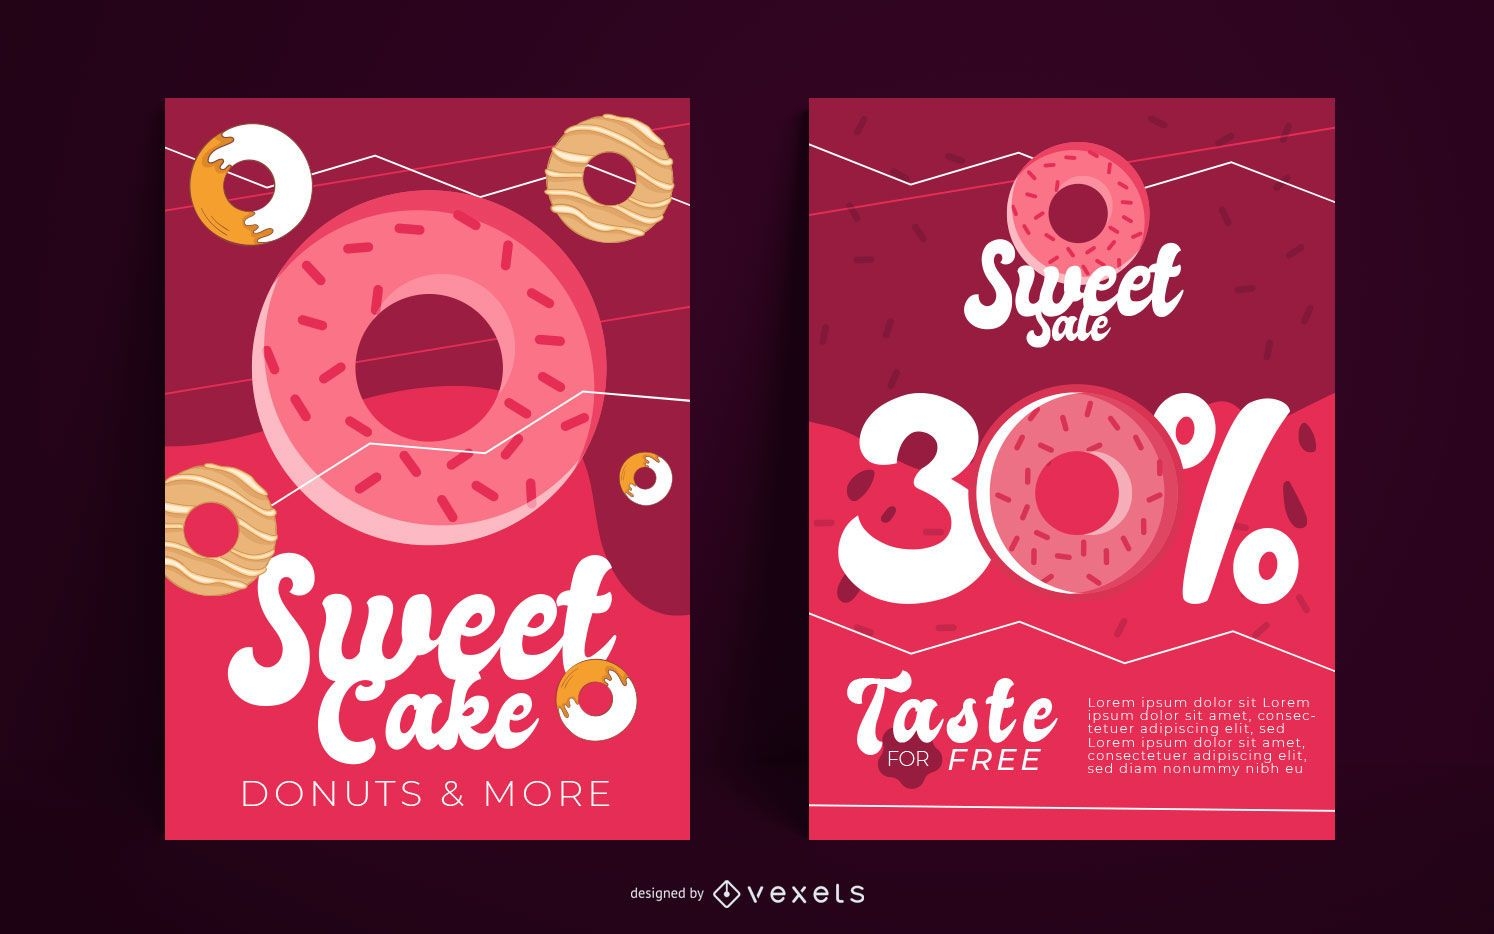 Sweets poster design